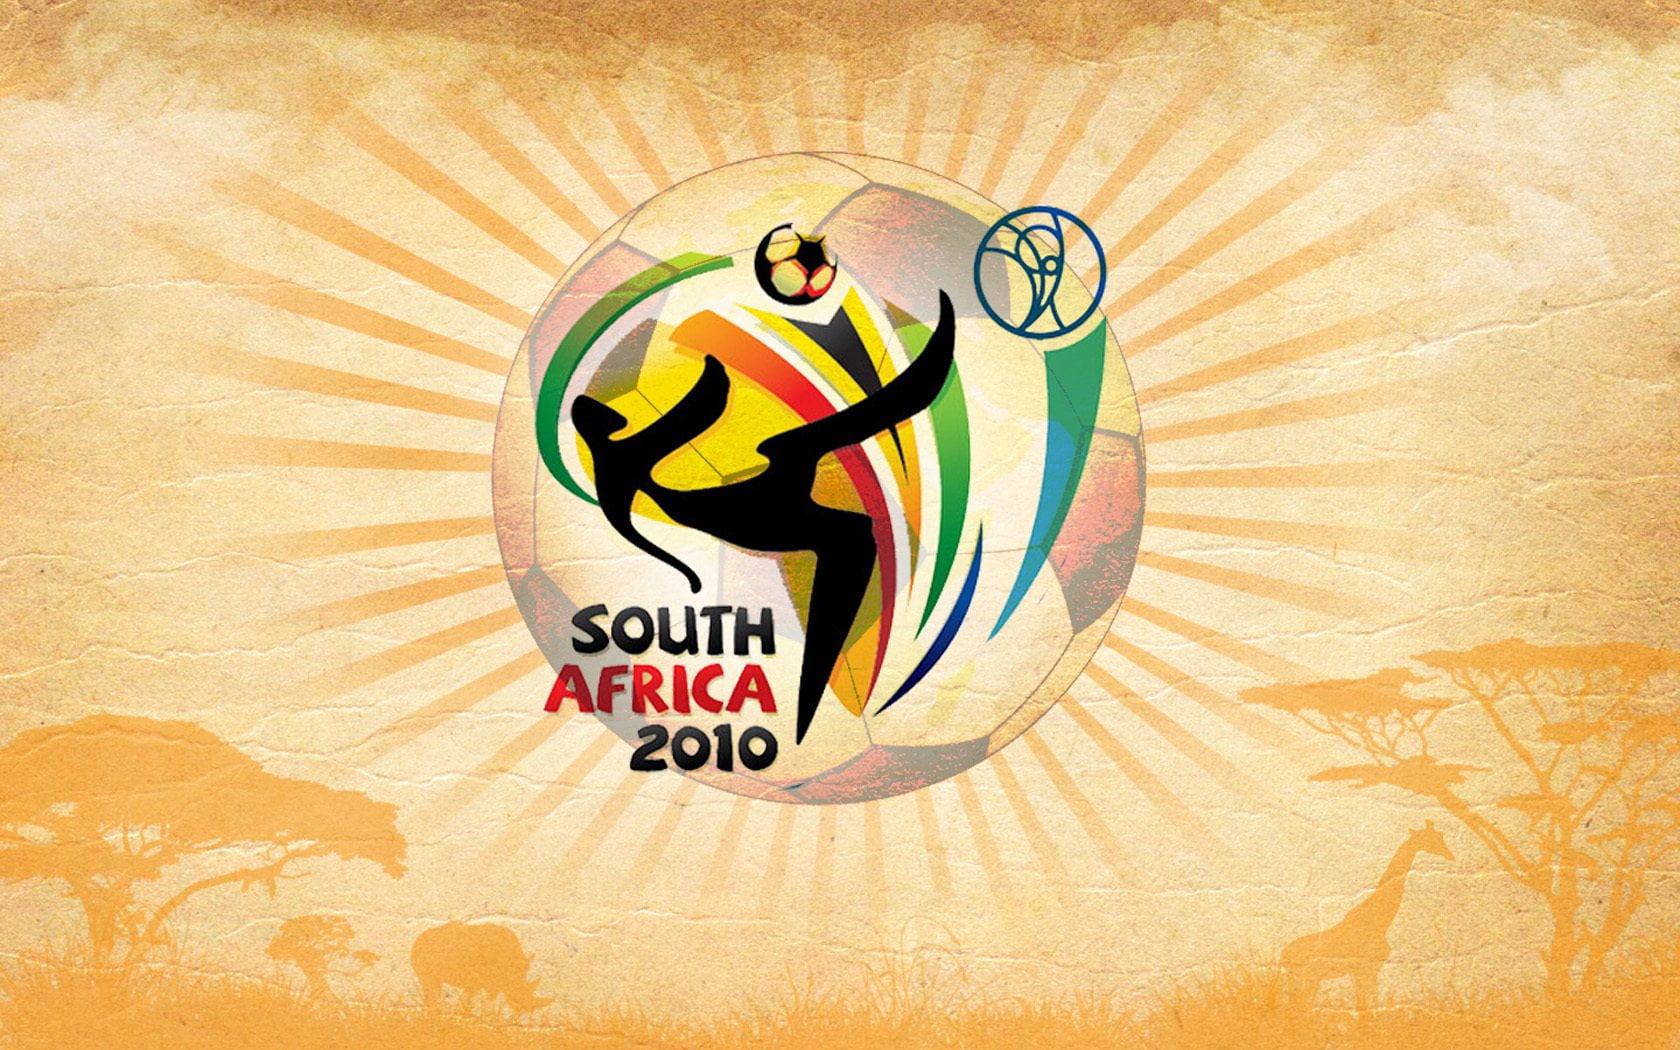 Football World Cup 2010, South Africa 2010 soccer icon, Sports